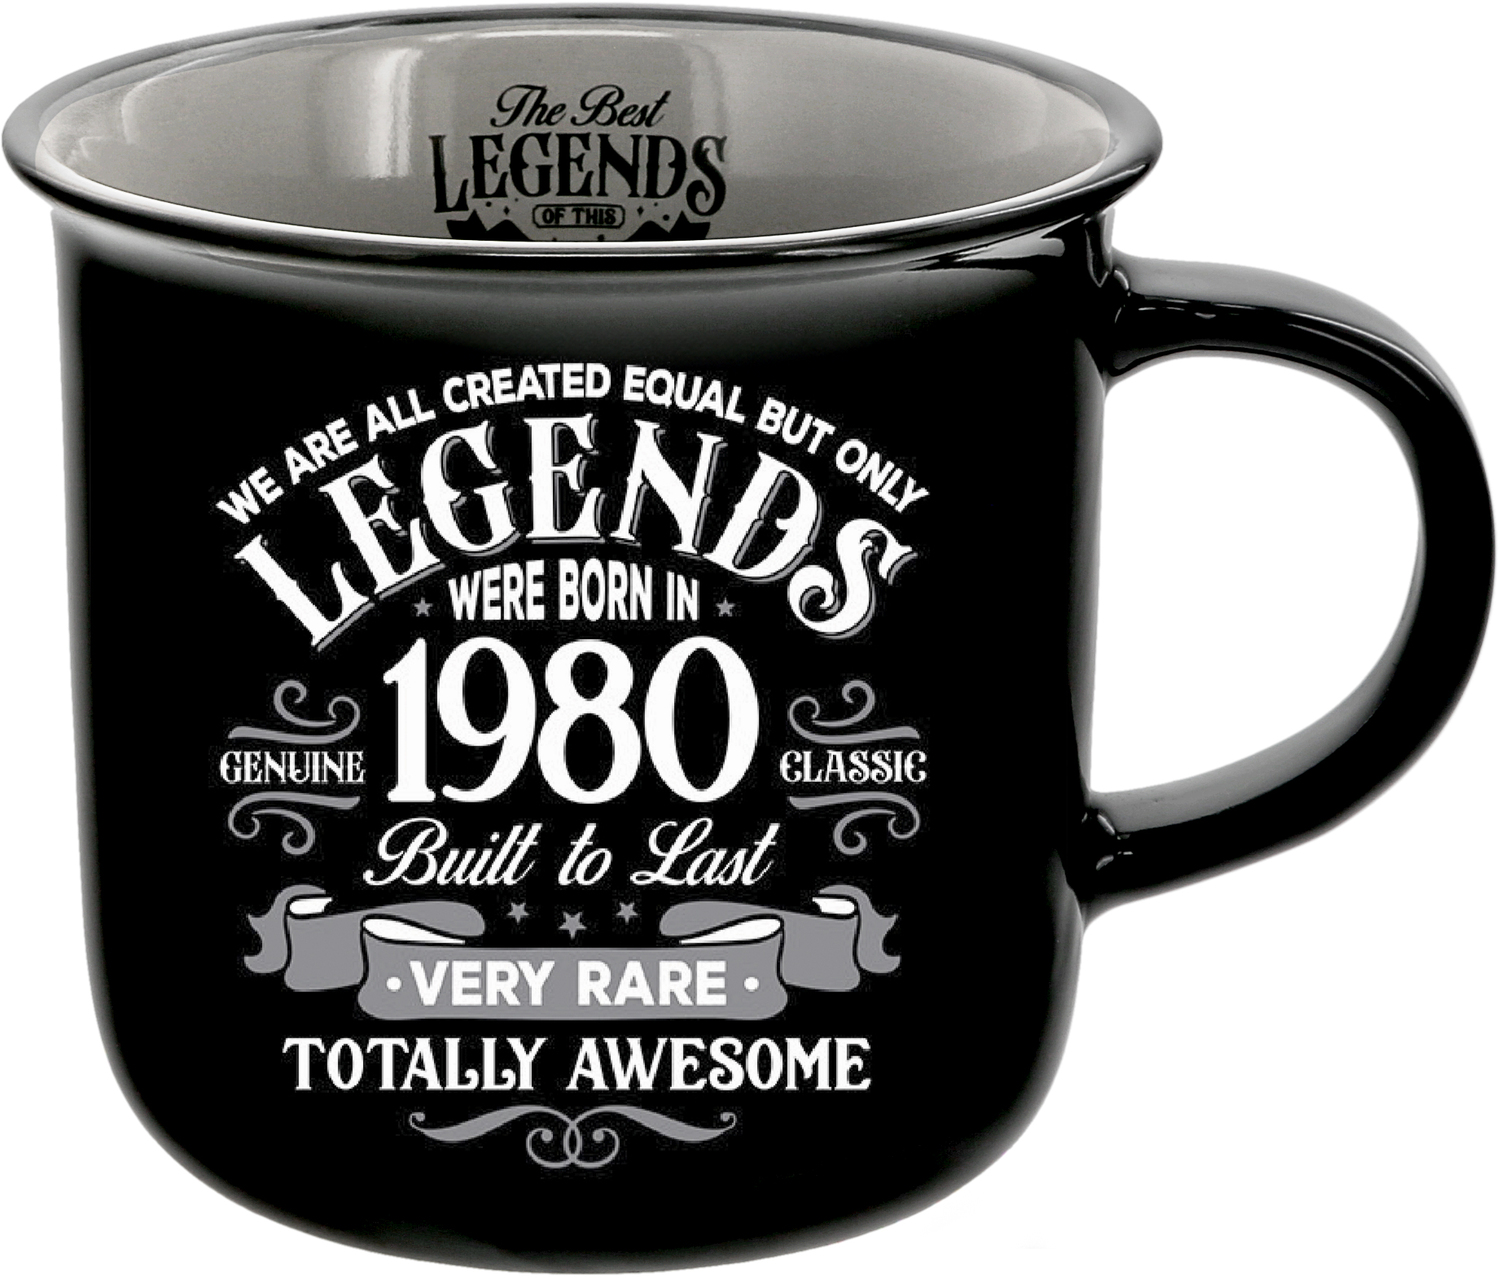 1980 by Legends of this World - 1980 - 13 oz Mug